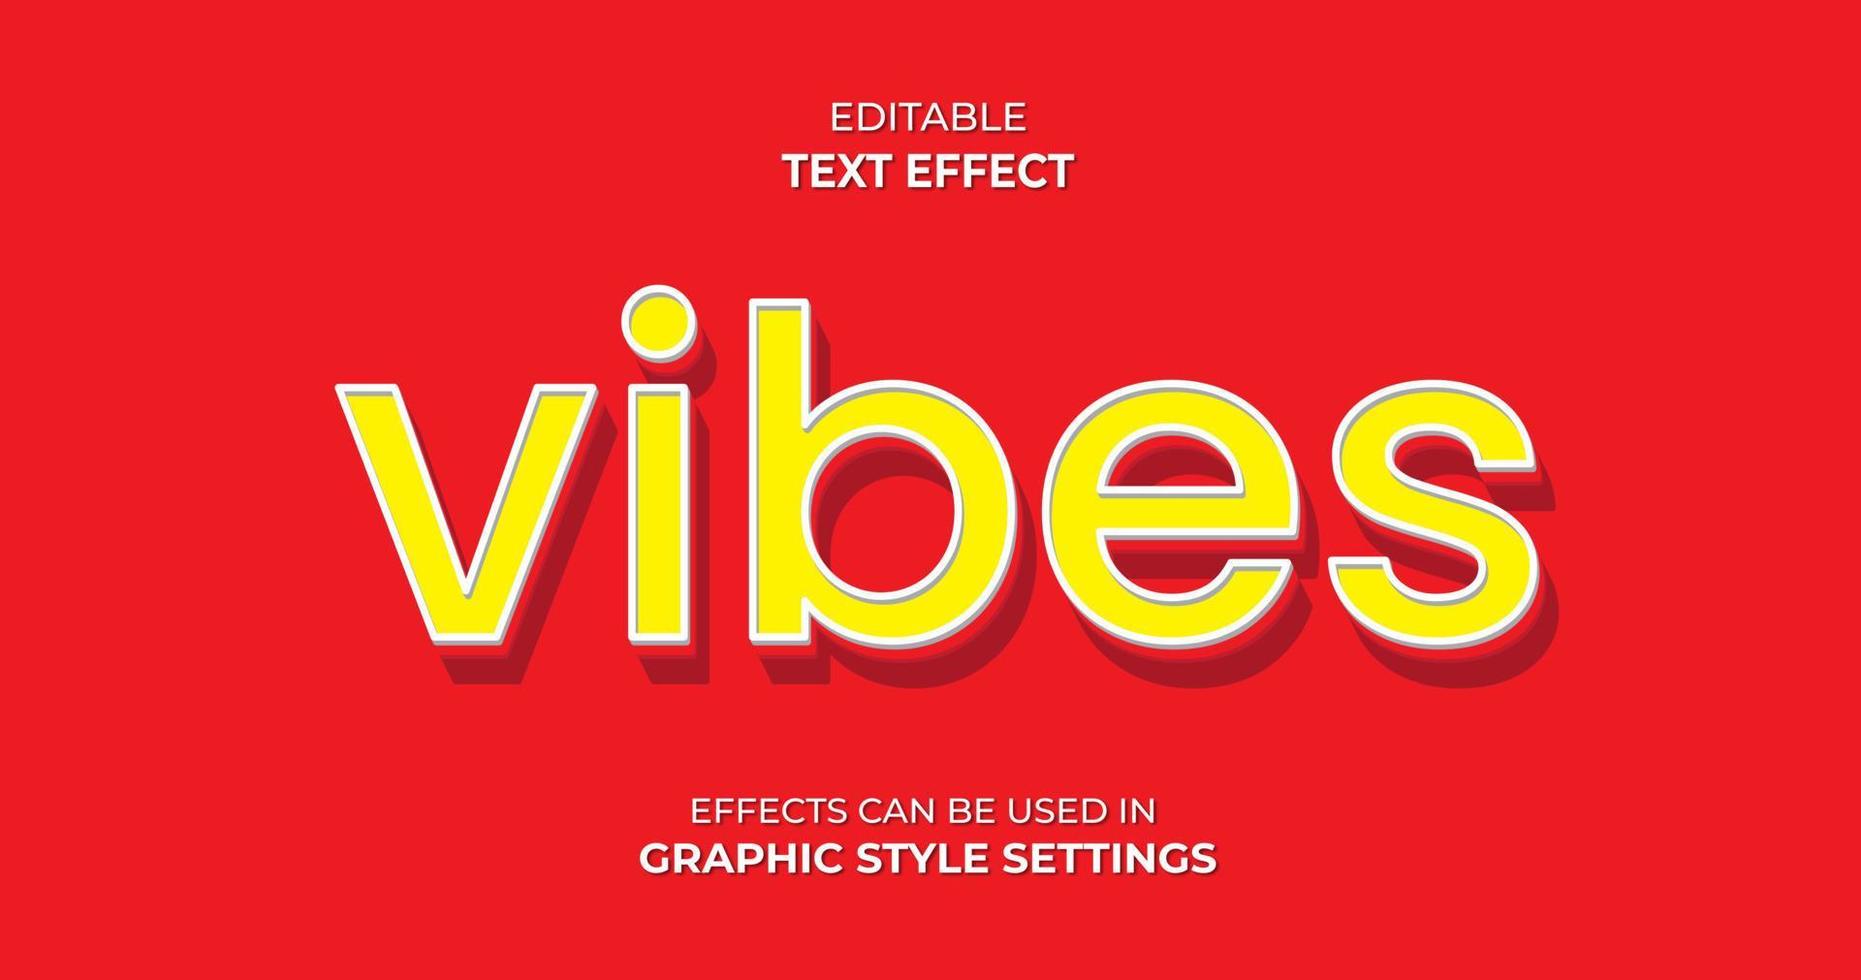 Vibes Text Effect with 3D letters vector